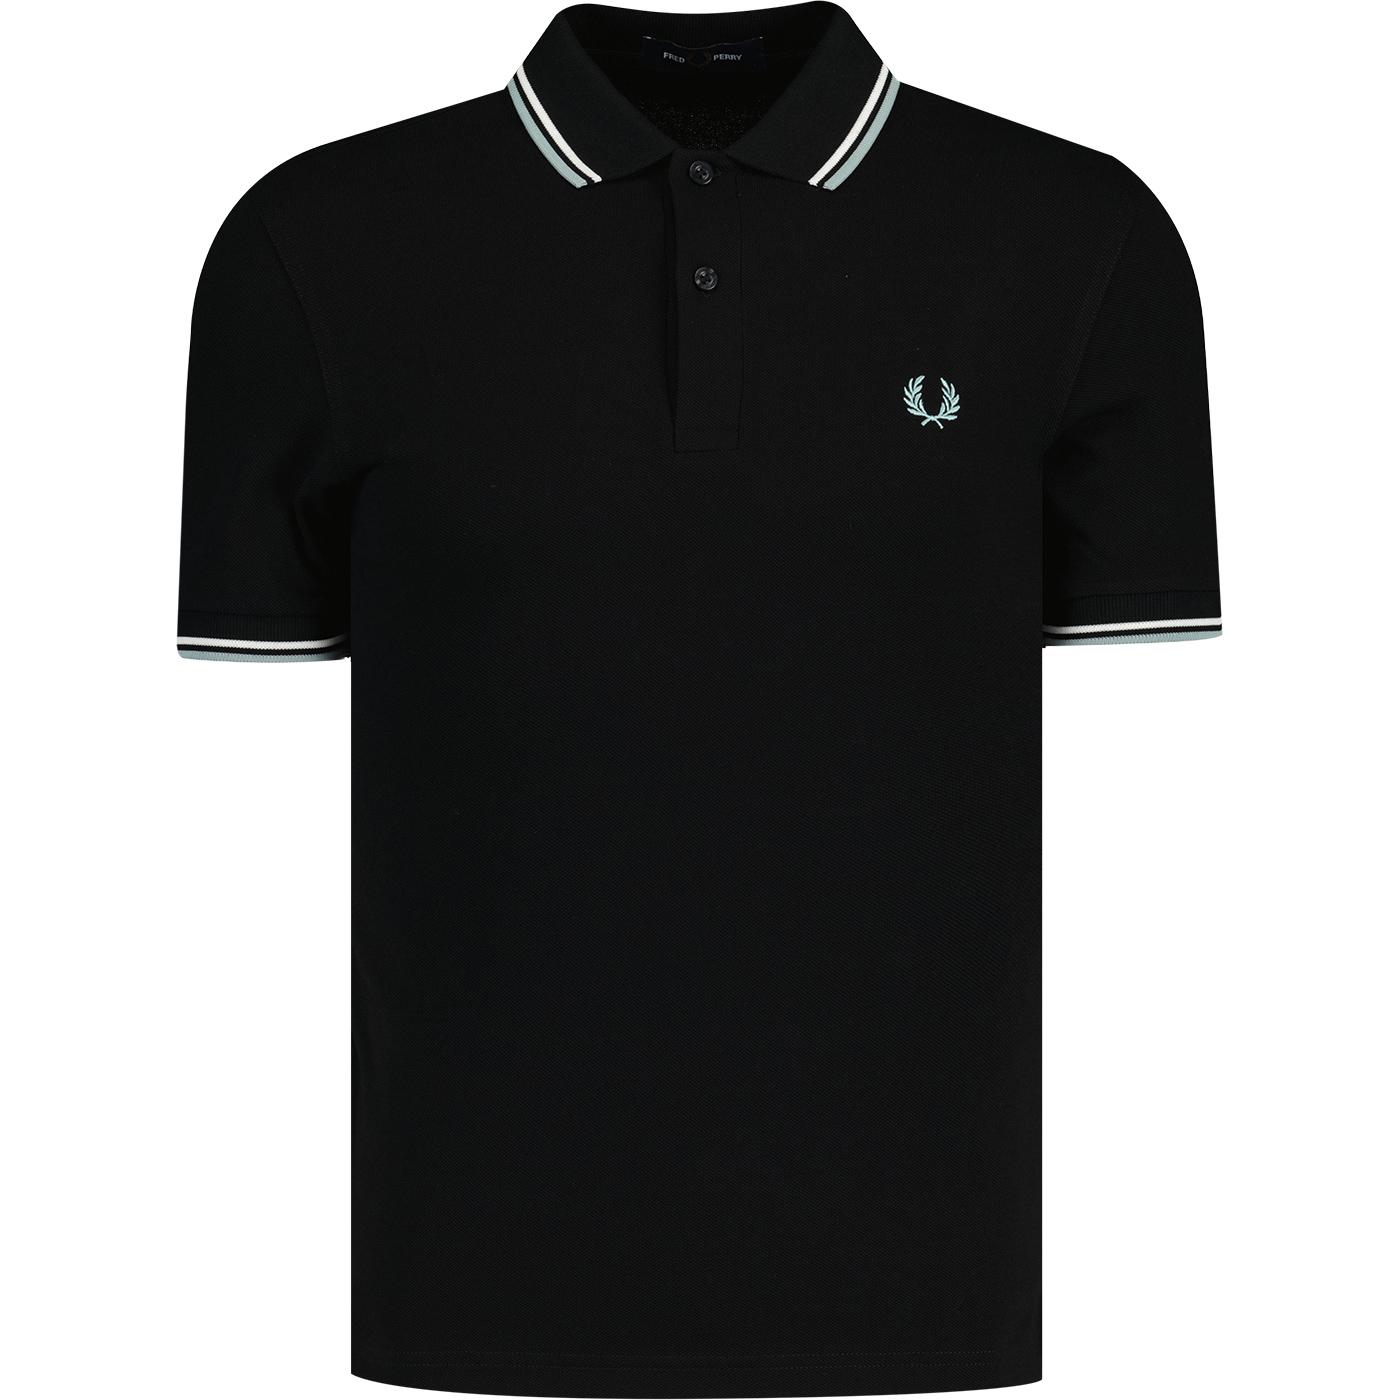 FRED PERRY M3600 Mod Twin Tipped Polo Shirt B/W